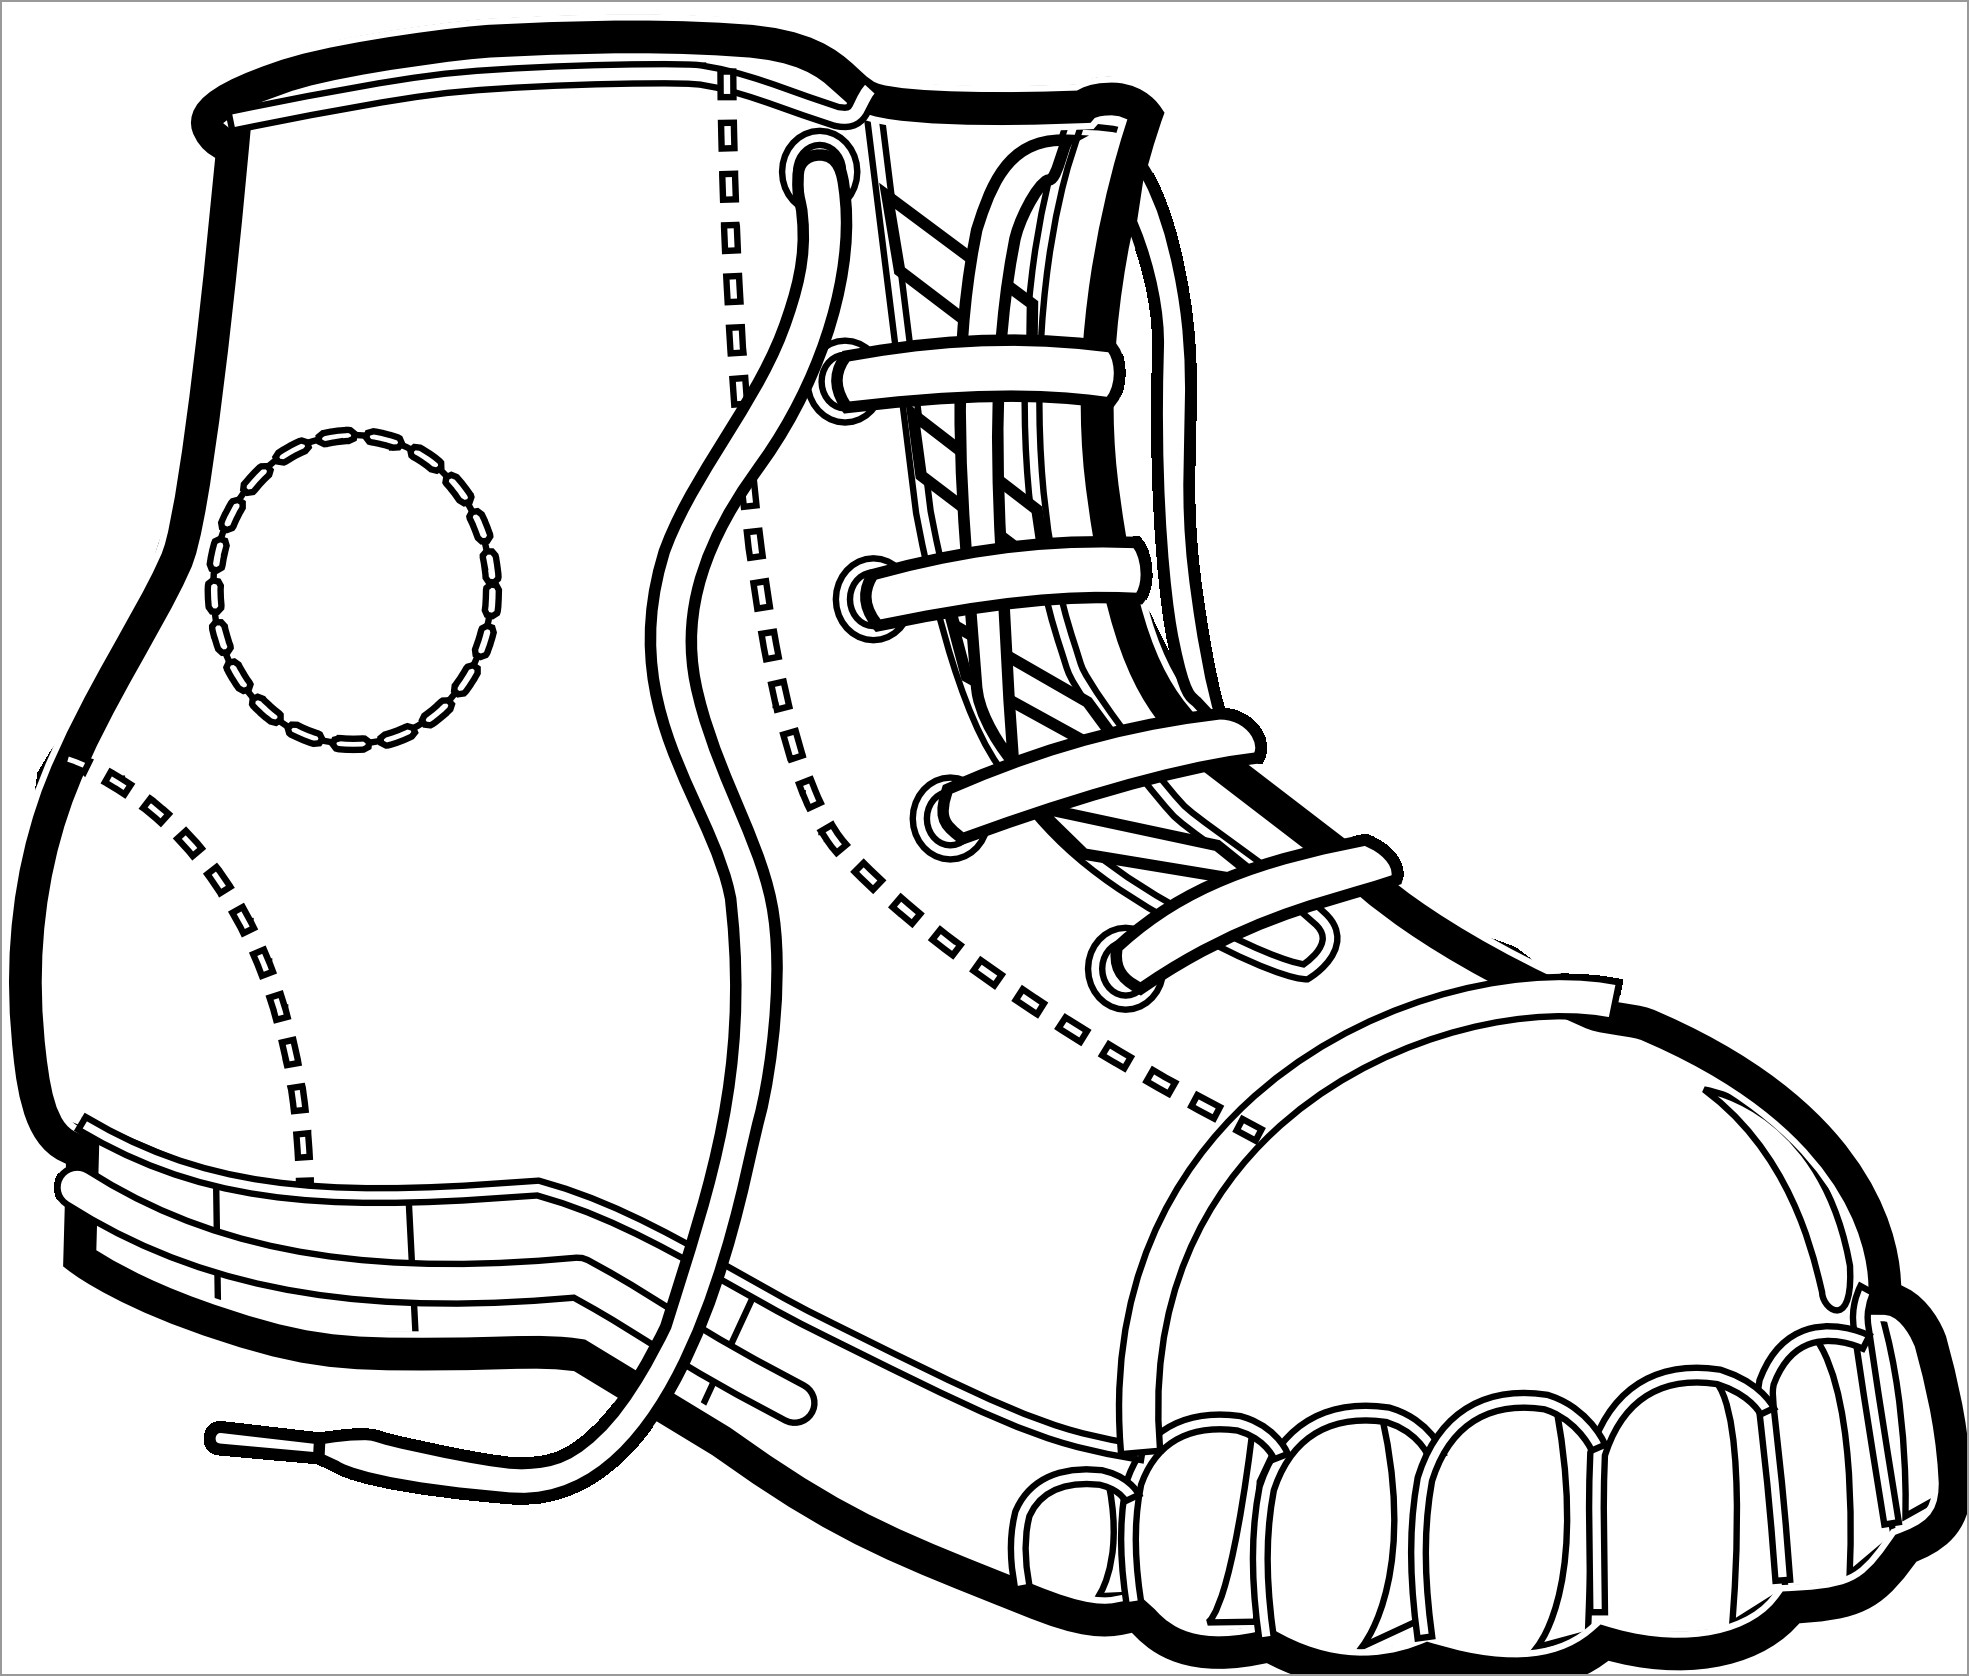 Winter Boots Coloring Page